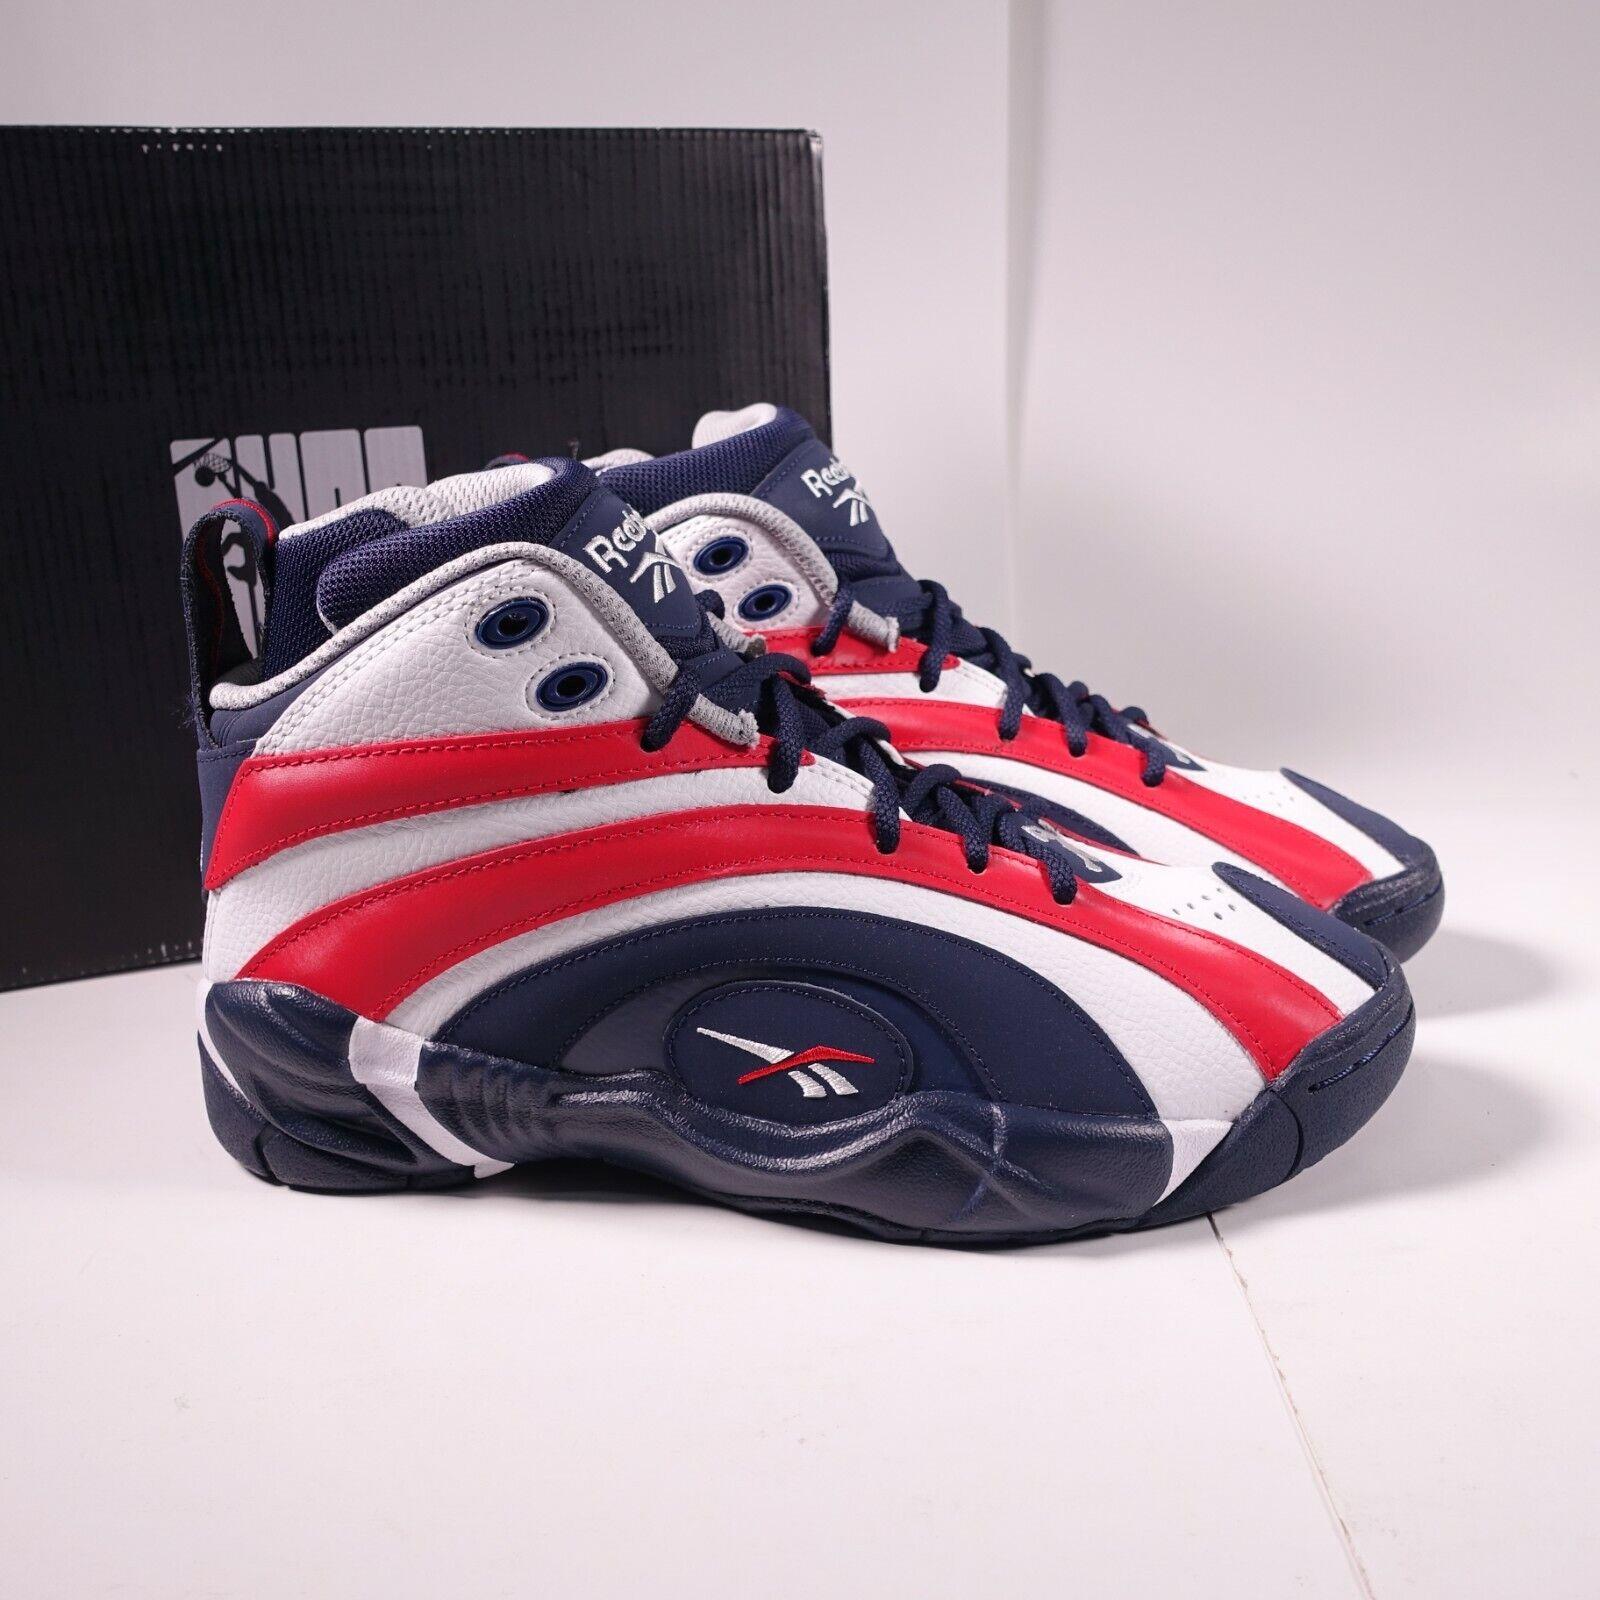 Size 8.5 Men`s Reebok Shanqnosis Basketball Shoes FV2971 Navy/white/red